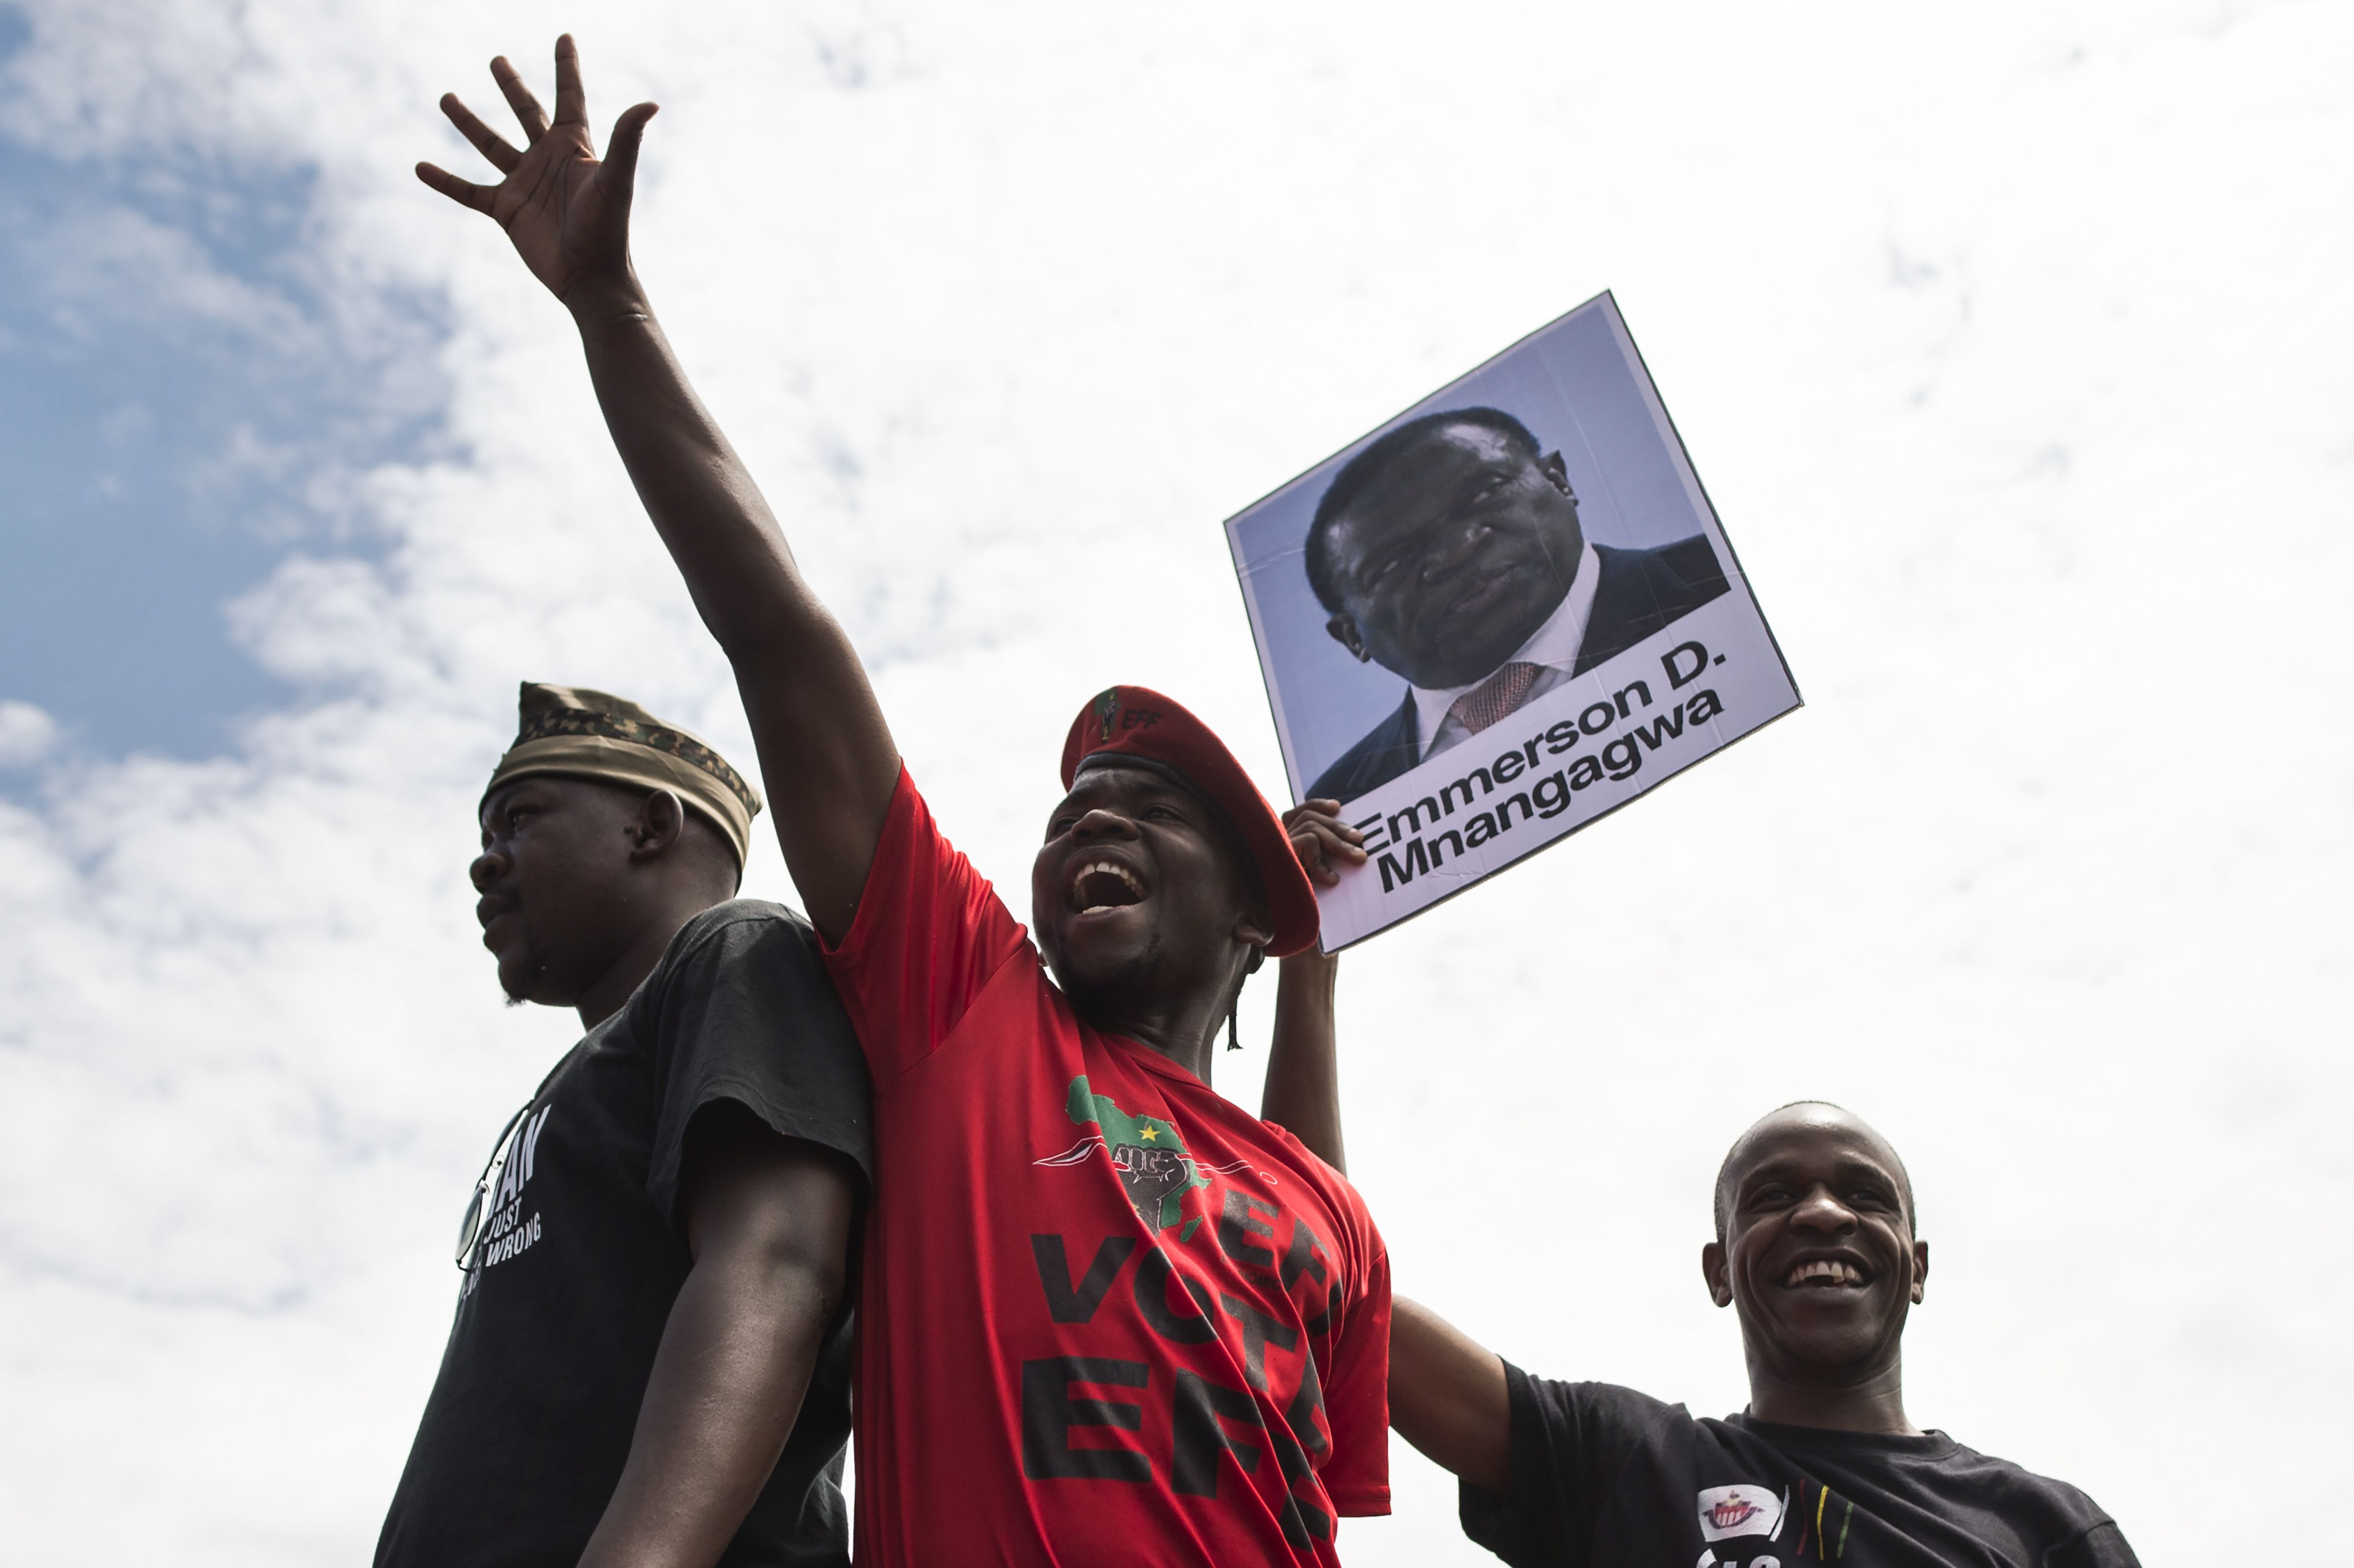 University of Zimbabwe students, holding a portrait of former vice president Emmerson Mnangagwa, take part in a demonstration on Nov. 20, 2017 in Harare, to demand the withdrawal of Grace Mugabe's doctorate (AFP/Getty Images)